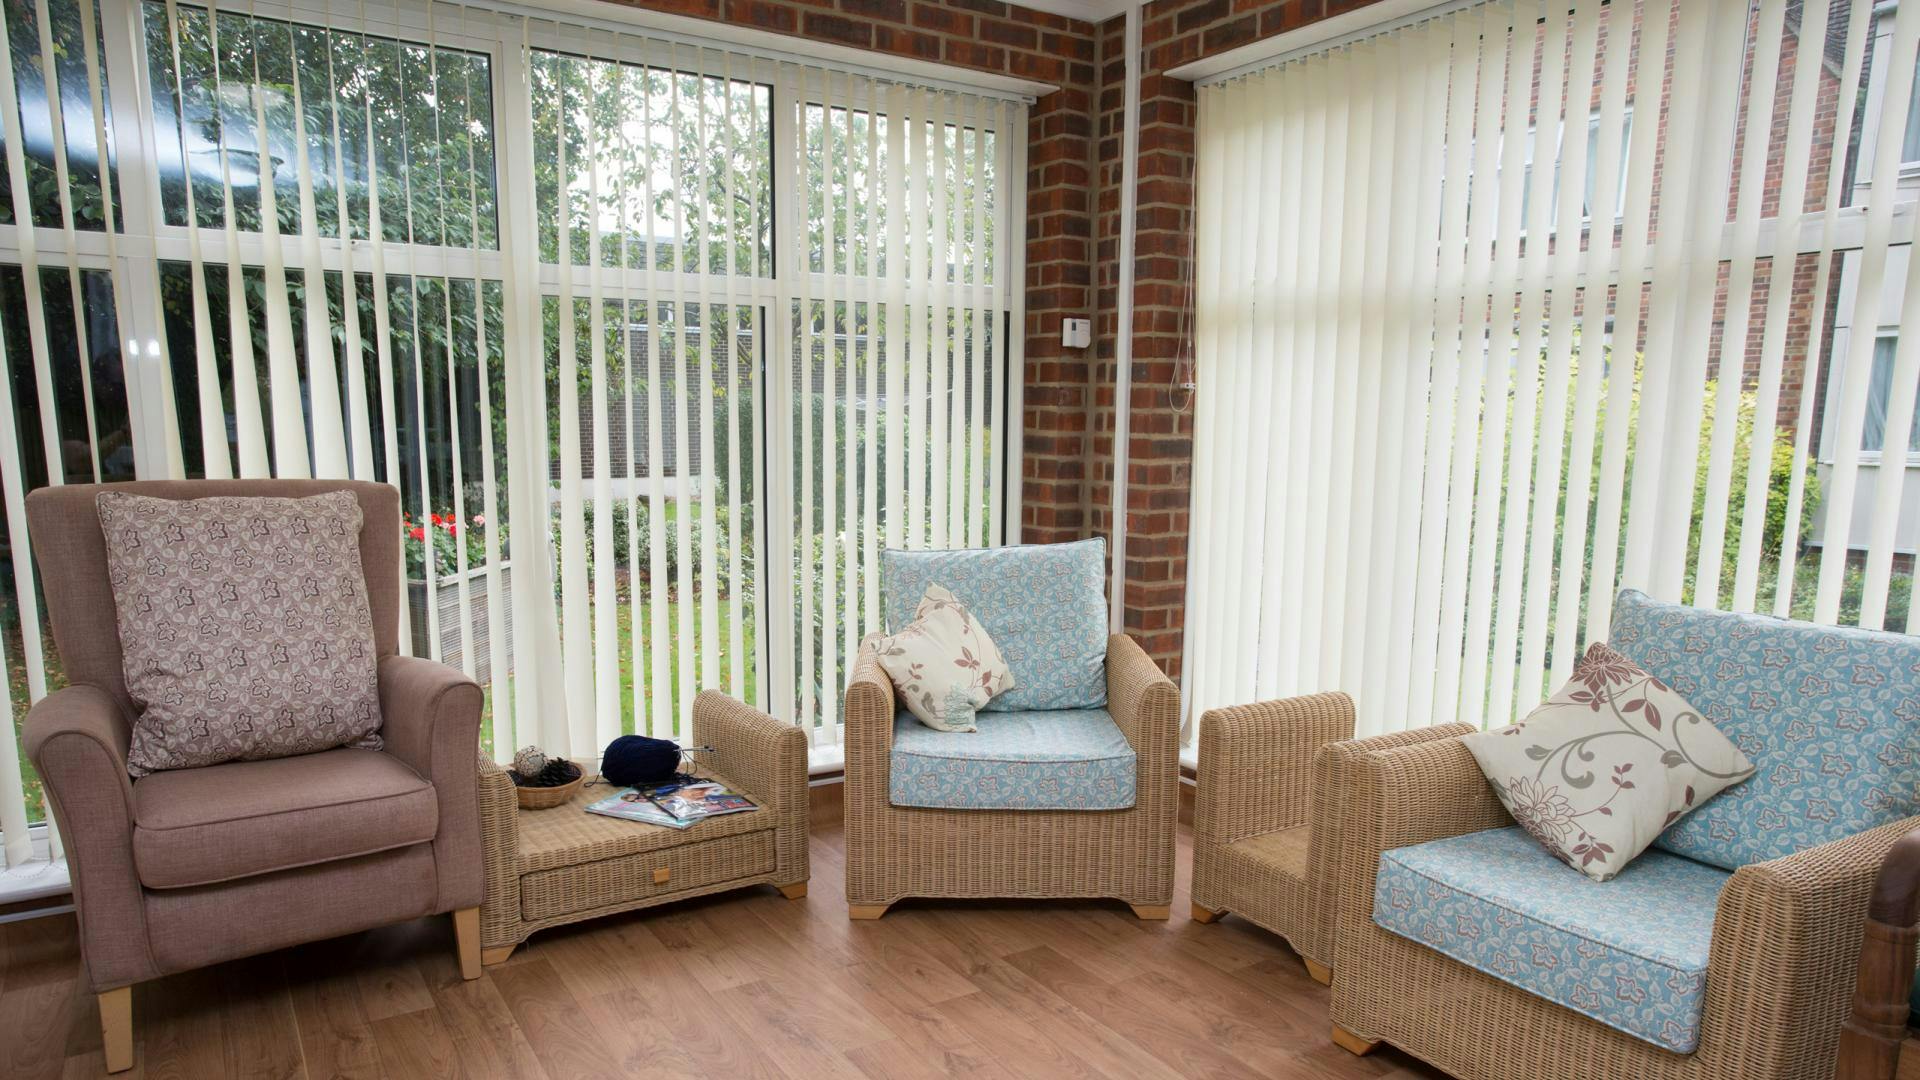 Communal Area at Willowcroft Care Home in Salisbury, Wiltshire